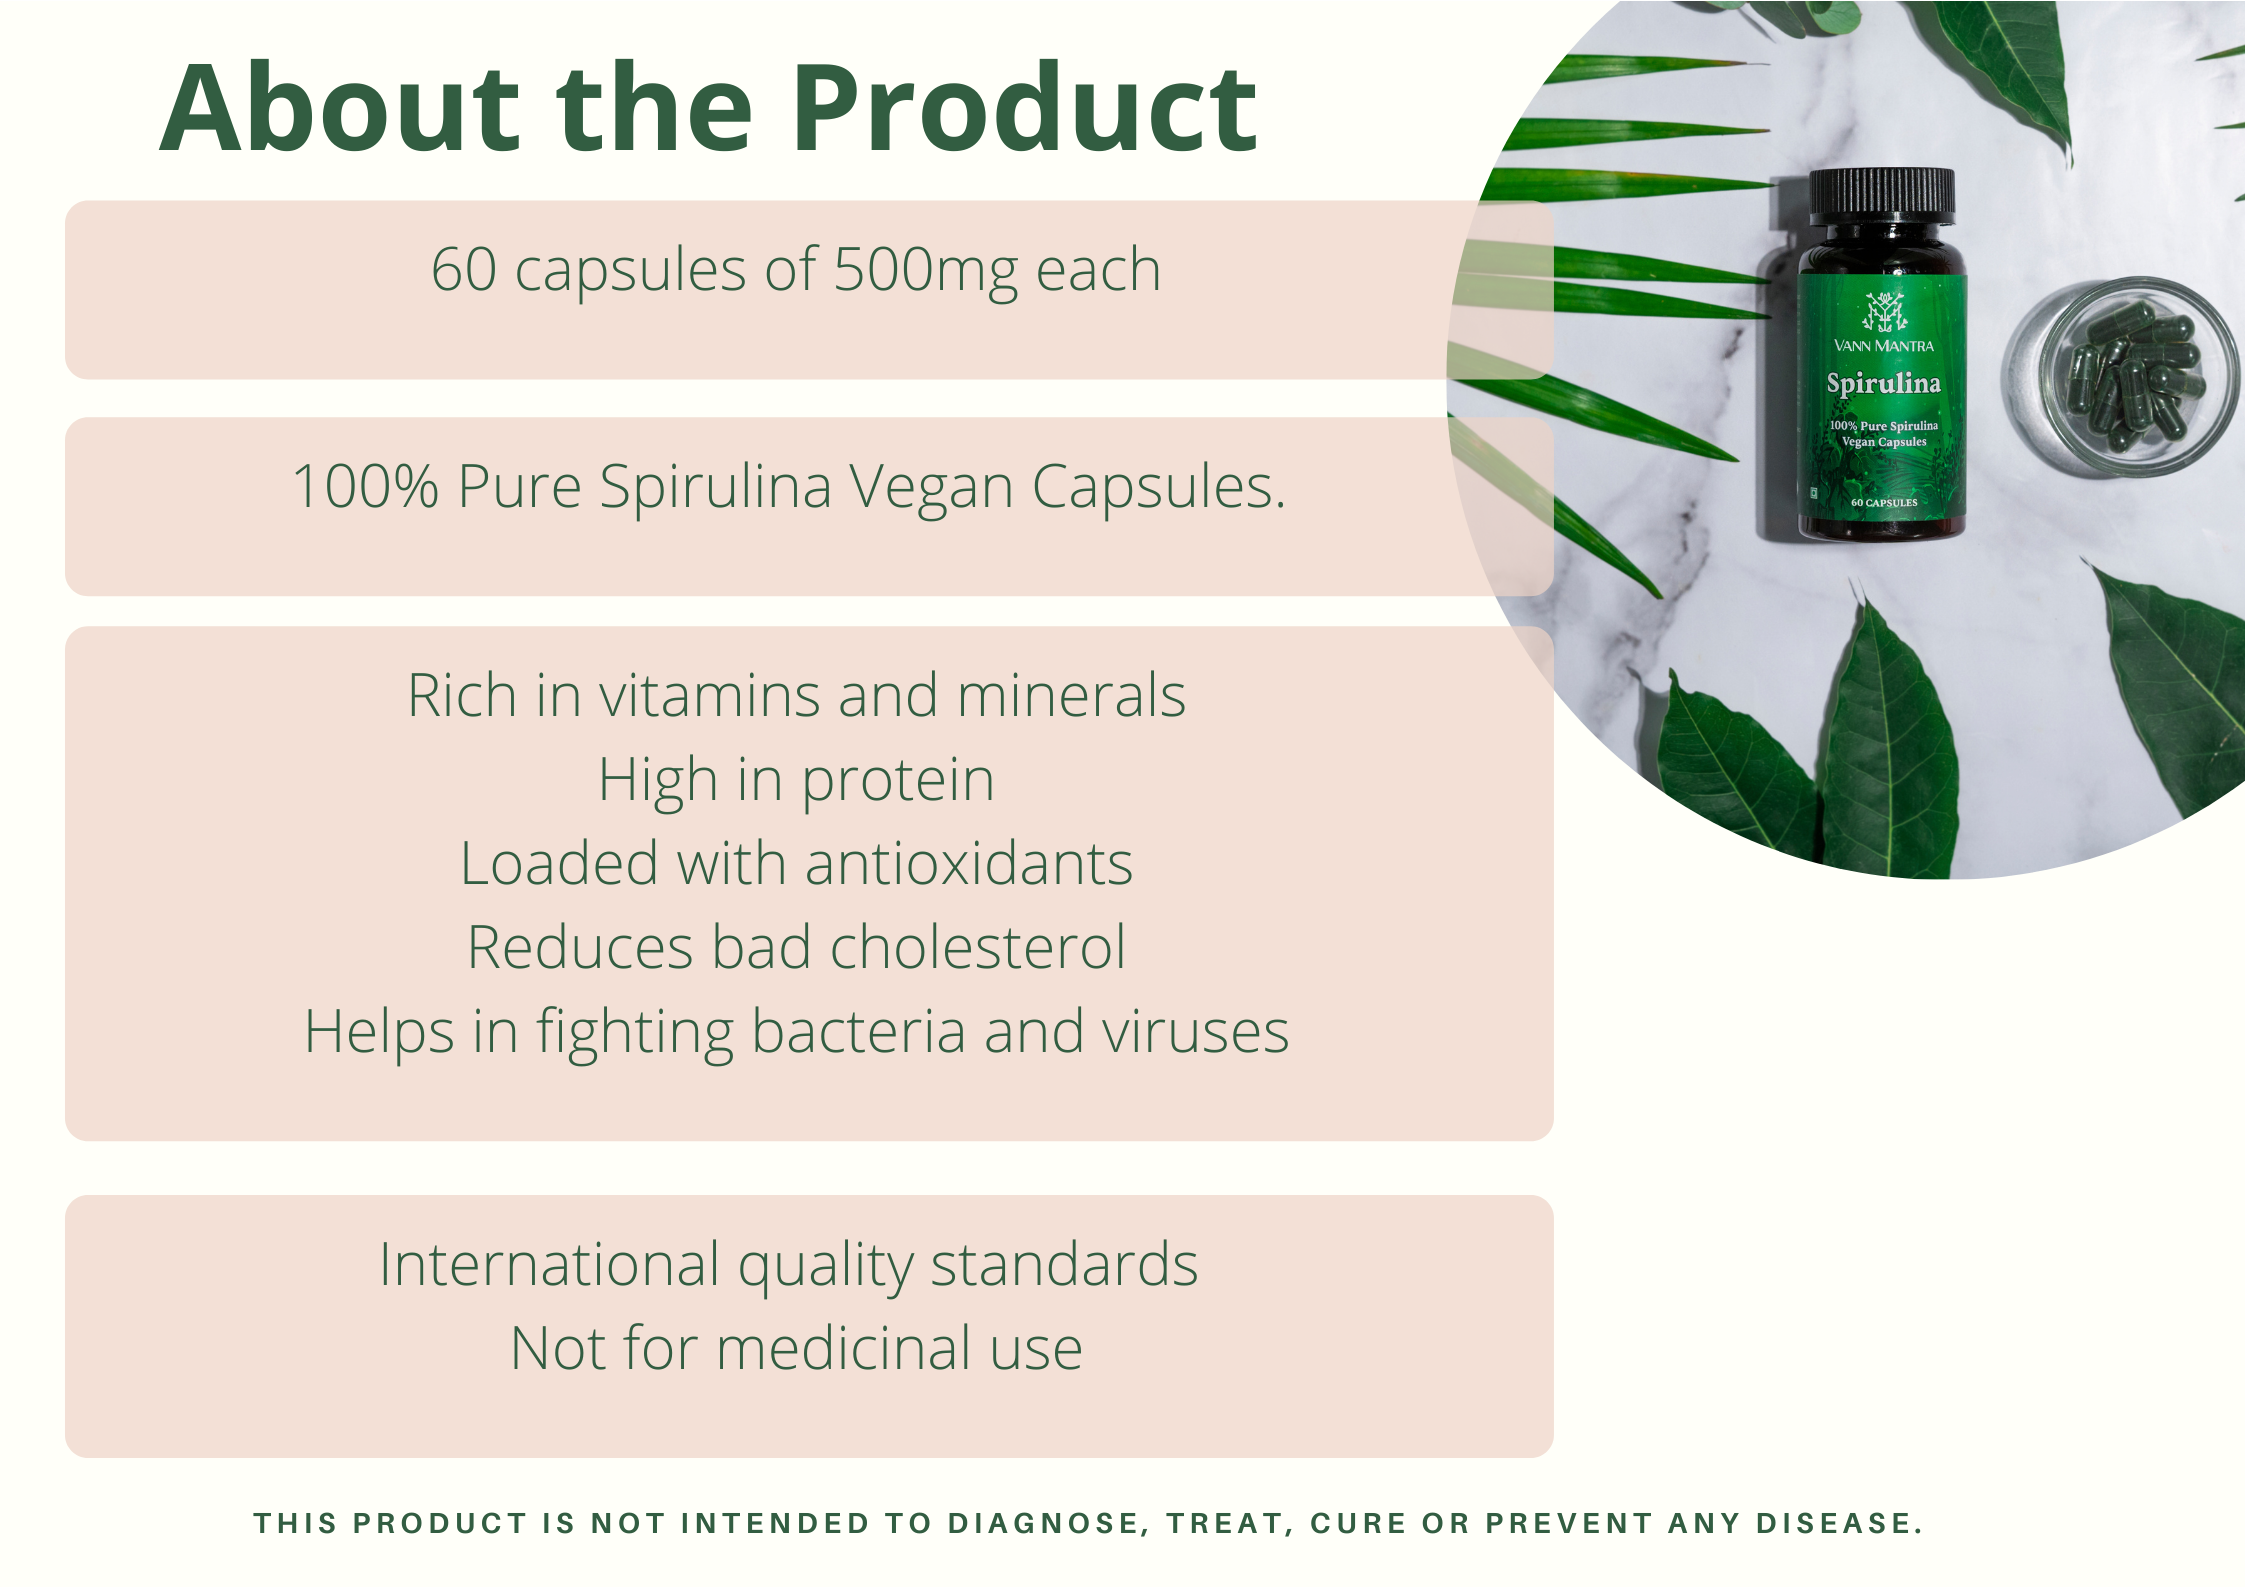 Infographic explaining the features and benefits of Spirulina Capsules.